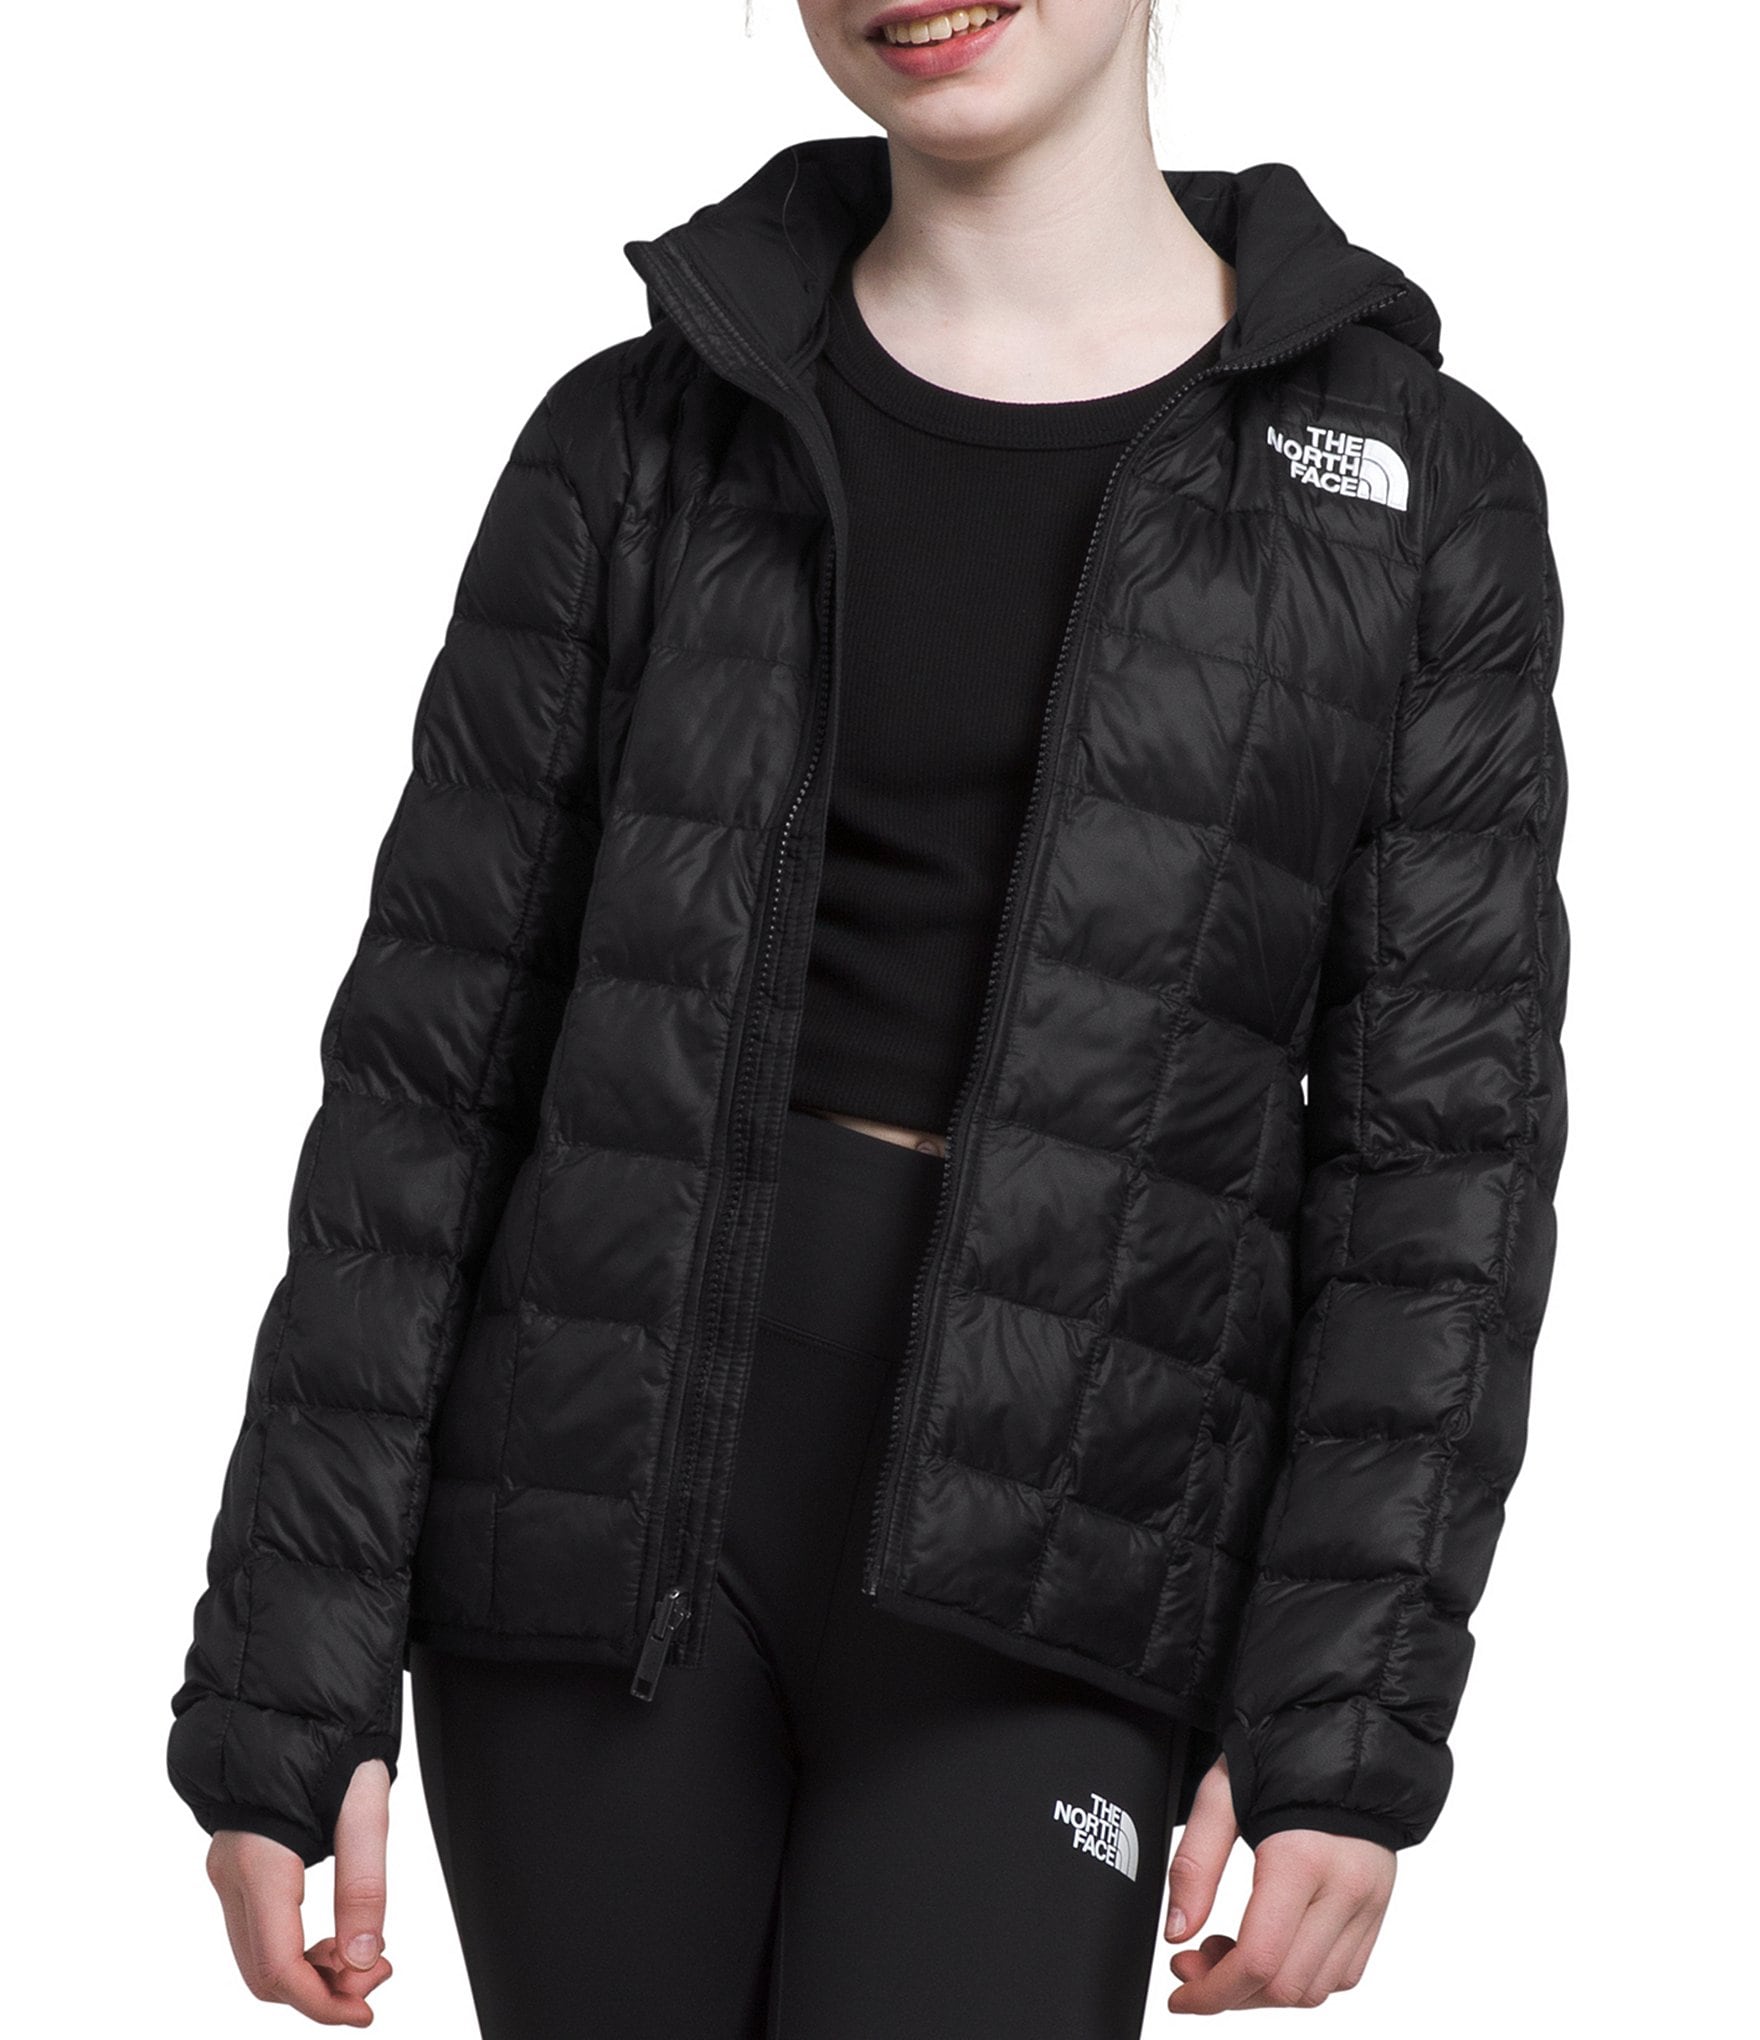 The North Face Little/Big Girls 6-20 Long Sleeve Thermoball Hooded ...